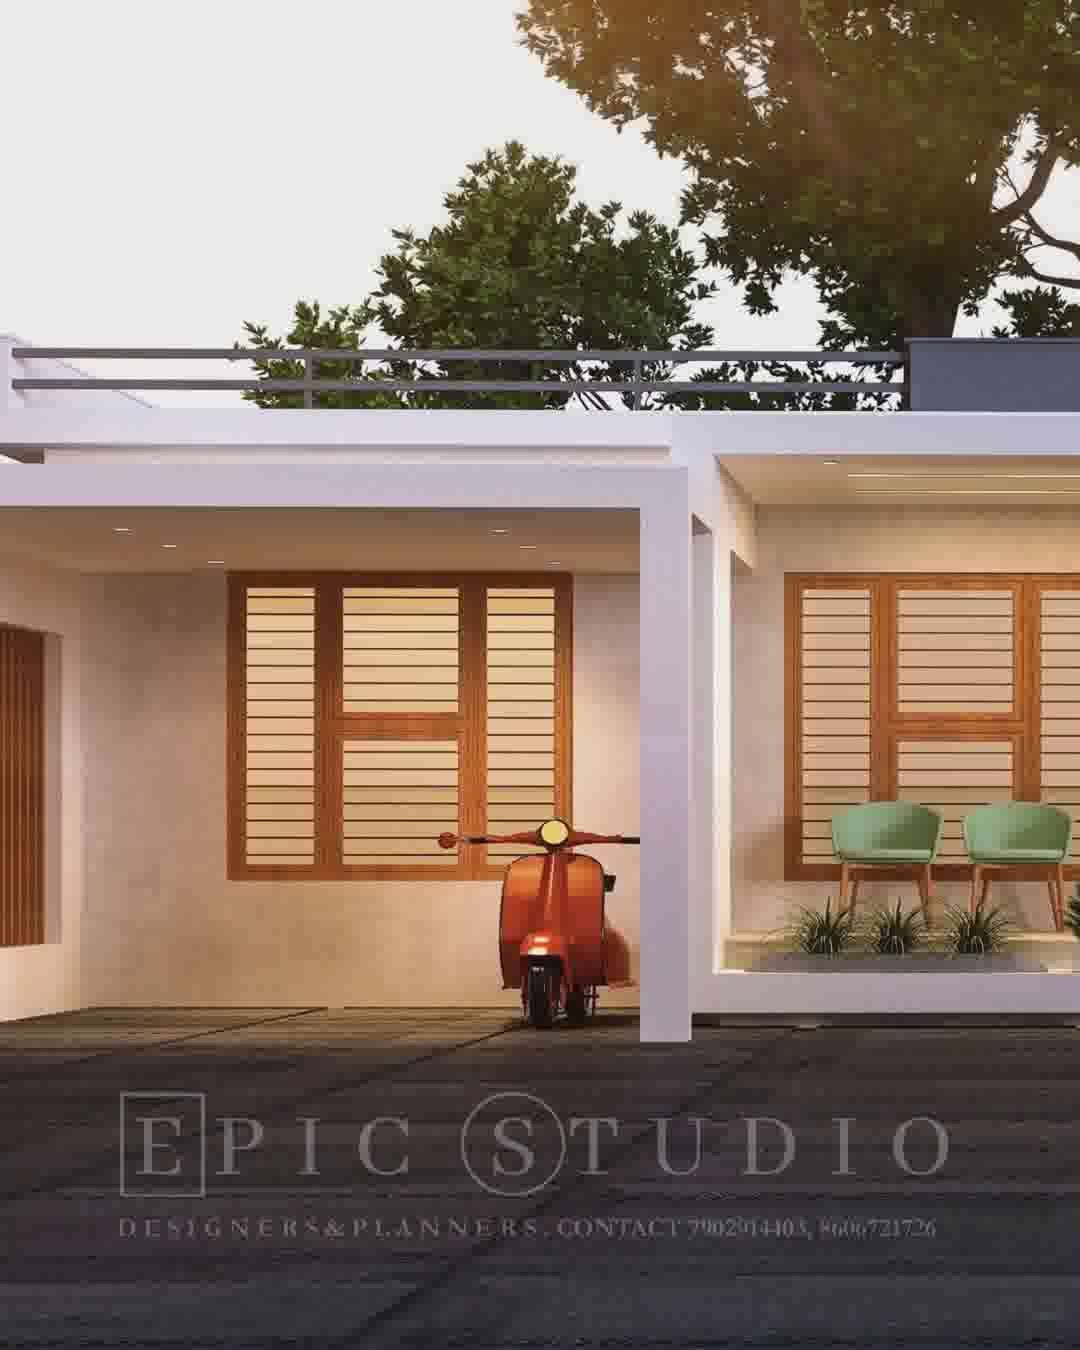 FOR 3D DESIGN
CONTACT ME : 8606721726 

  #3d  #3Ddesigner #house3ddesign  #KeralaStyleHouse #keralahomestyle #ContemporaryHouse #groundfloor #keralastyle #HouseDesigns #ElevationHome #elavation #ElevationDesign  #3Delevation #architecturedesigns #groundfloorelevation